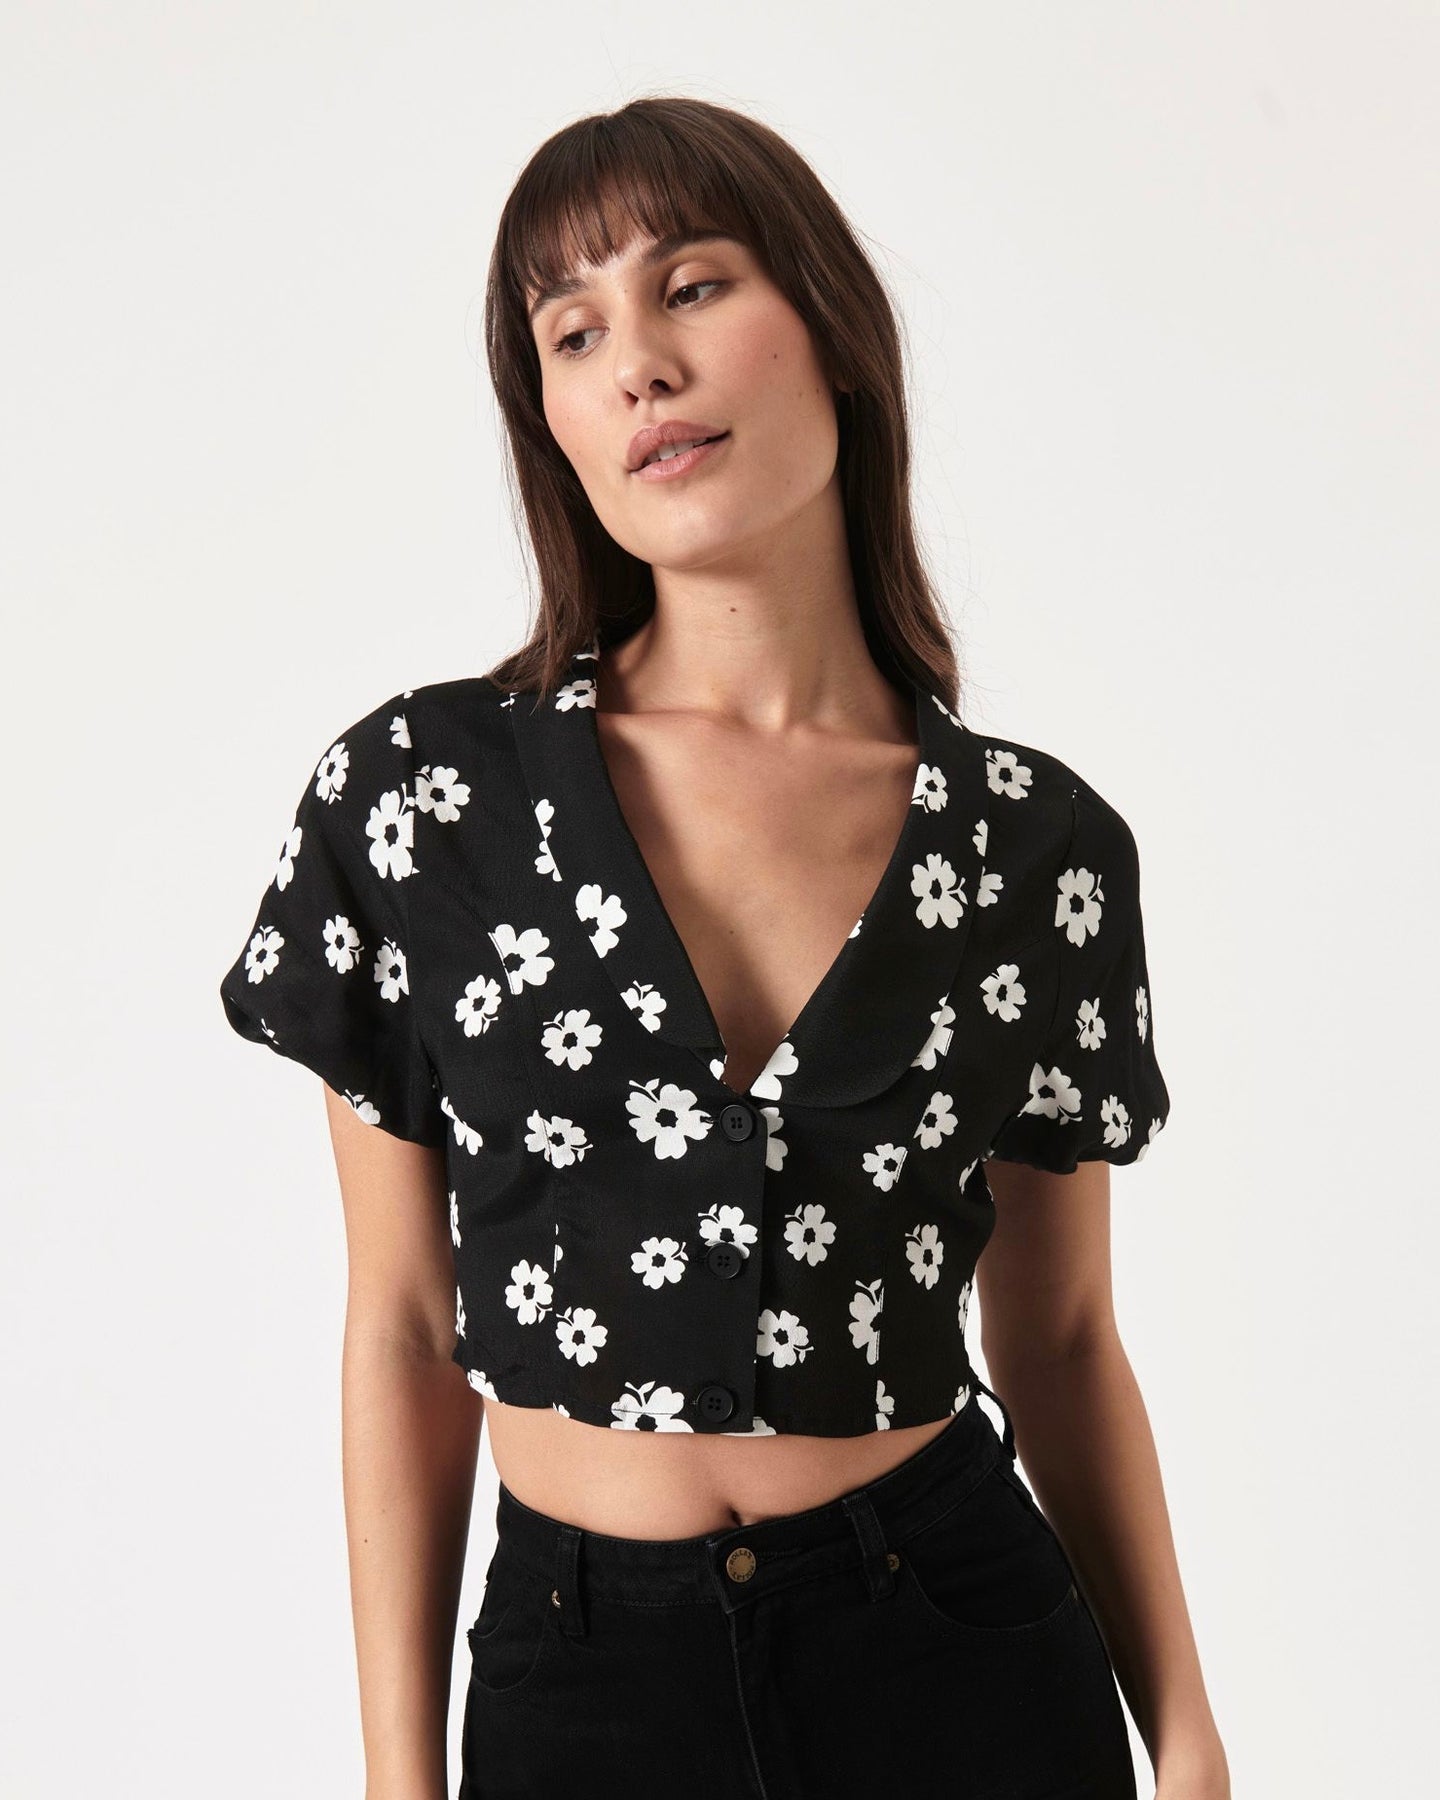 the Rolla's Folk Floral Susie Top in Black worn by a model posing looking to the side